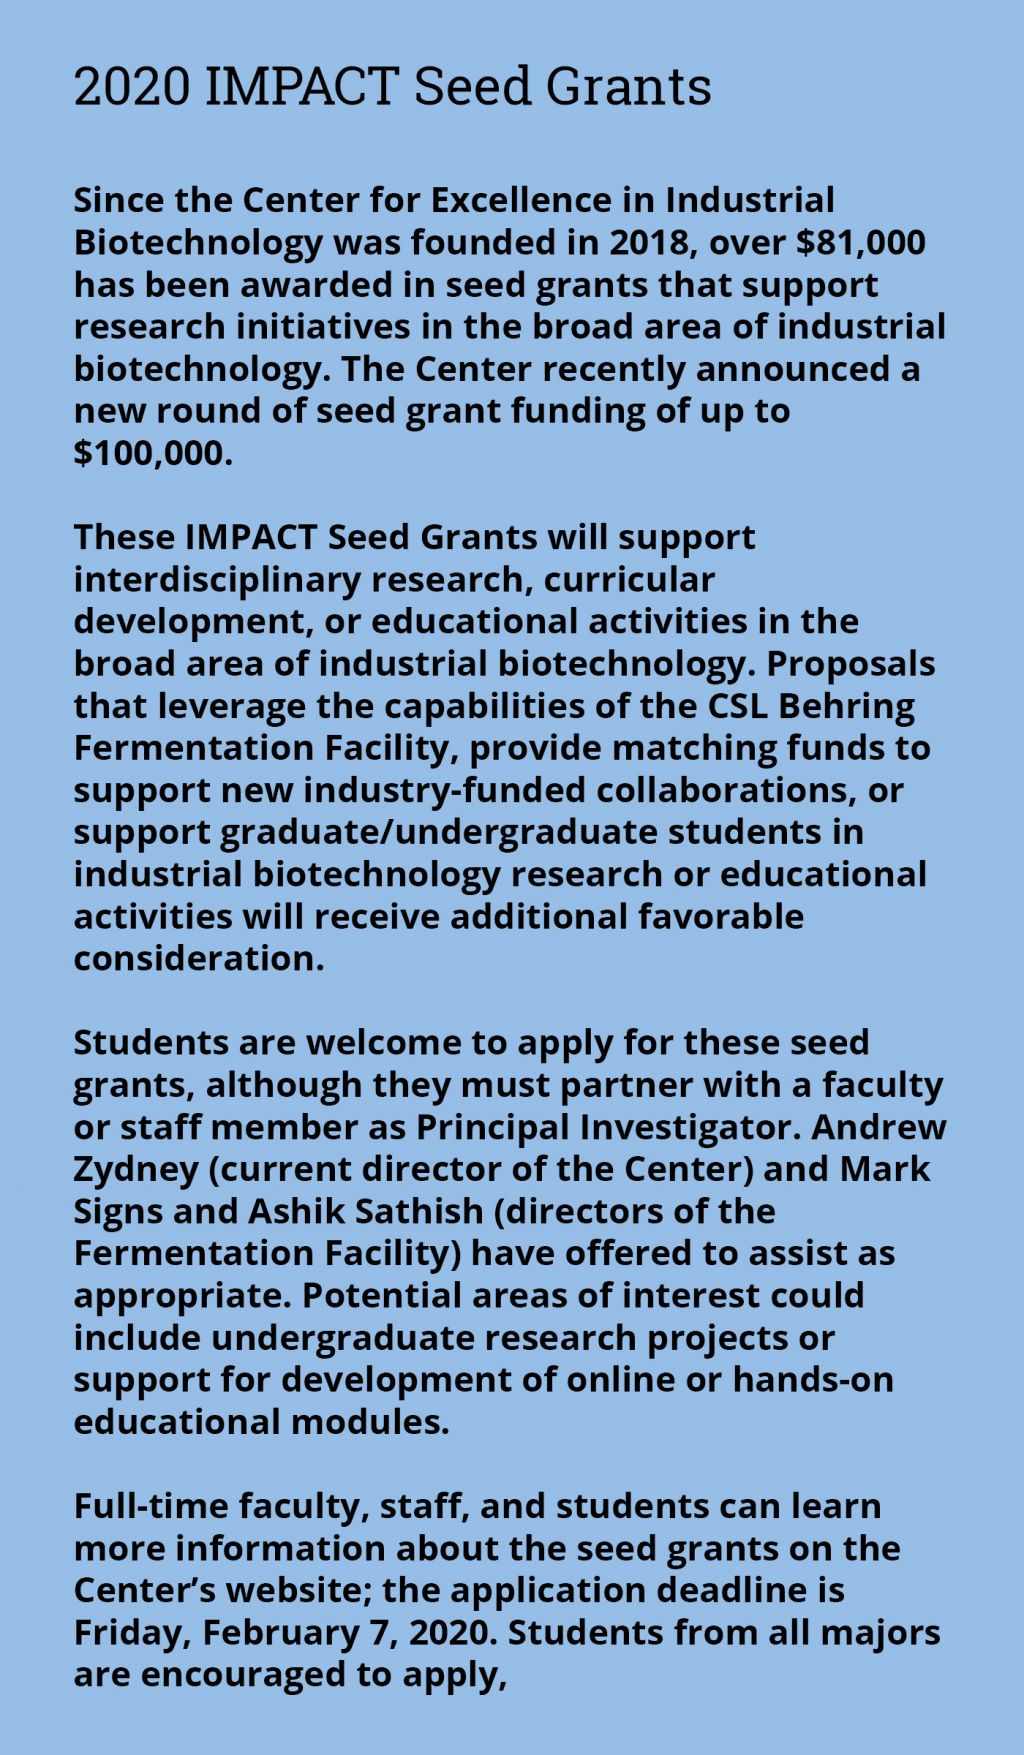 2020 IMPACT Seed Grants - Since the Center for Excellence in Industrial Biotechnology was founded in 2018, over $81,000 has been awarded in seed grants that support research initiatives in the broad area of industrial biotechnology. The Center recently announced a new round of seed grant funding of up to $100,000.  These IMPACT Seed Grants will support interdisciplinary research, curricular development, or educational activities in the broad area of industrial biotechnology. Proposals that leverage the capabilities of the CSL Behring Fermentation Facility, provide matching funds to support new industry-funded collaborations, or support graduate/undergraduate students in industrial biotechnology research or educational activities will receive additional favorable consideration.   Students are welcome to apply for these seed grants, although they must partner with a faculty or staff member as Principal Investigator. Andrew Zydney (current director of the Center) and Mark Signs and Ashik Sathish (directors of the Fermentation Facility) have offered to assist as appropriate. Potential areas of interest could include undergraduate research projects or support for development of online or hands-on educational modules.   Full-time faculty, staff, and students can learn more information about the seed grants on the Center’s website; the application deadline is Friday, February 7, 2020. Students from all majors are encouraged to apply,